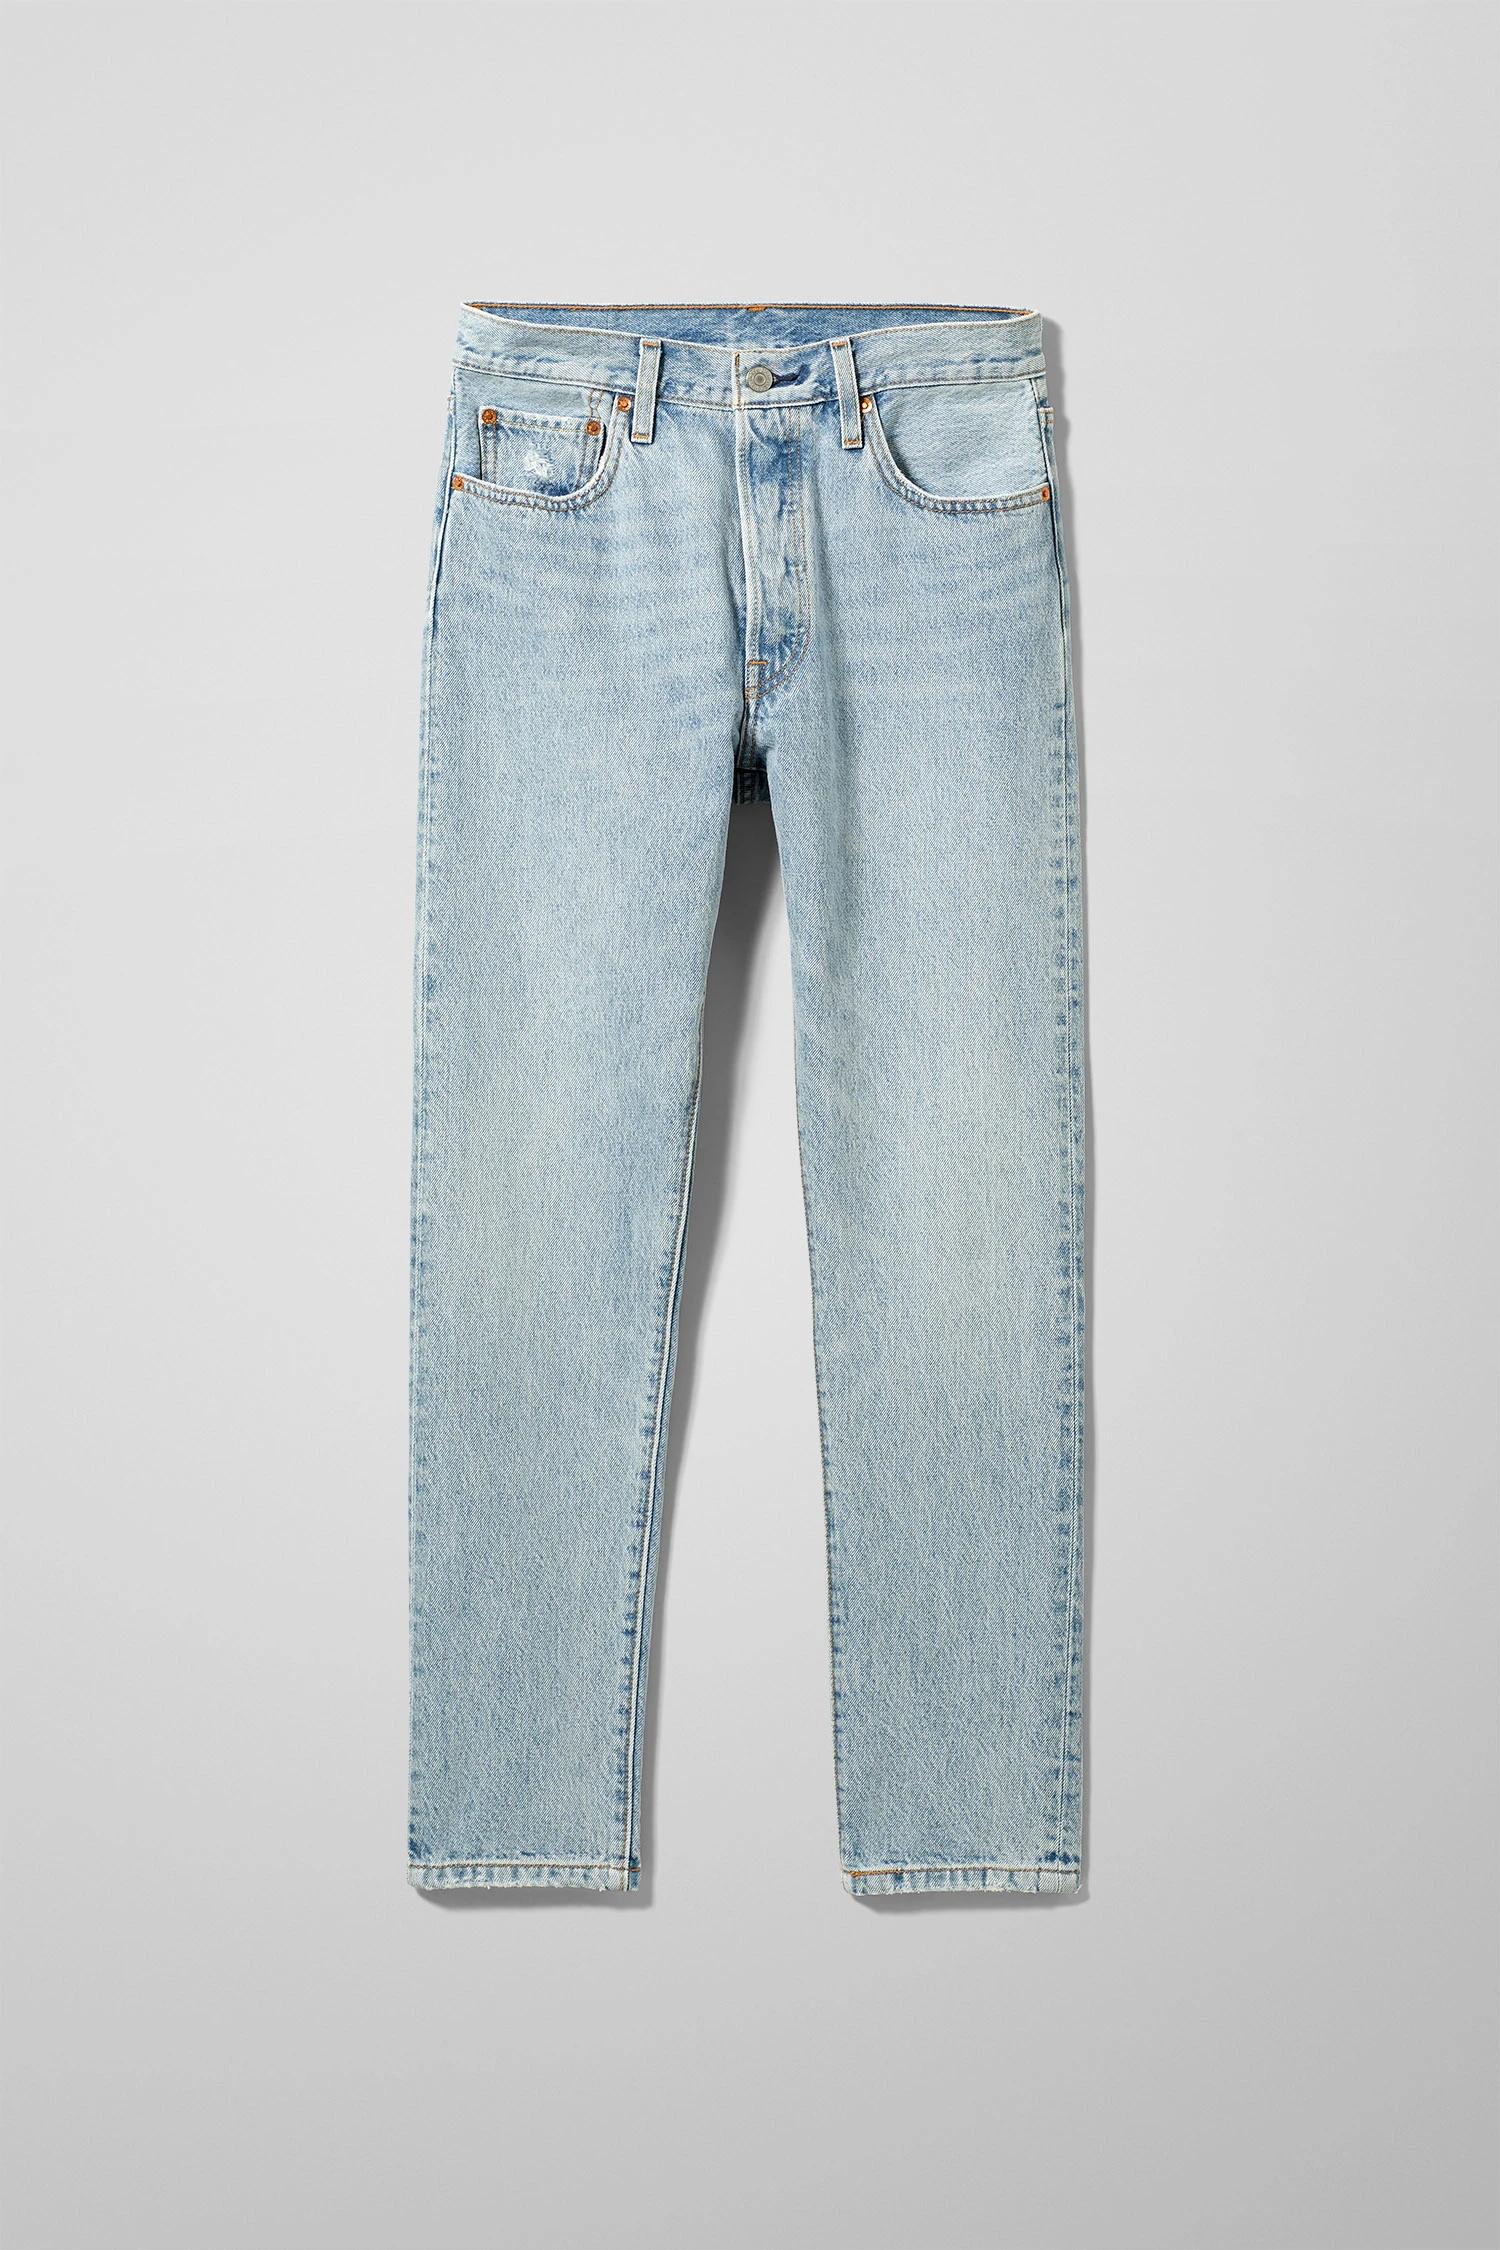 levis 501 lovefool